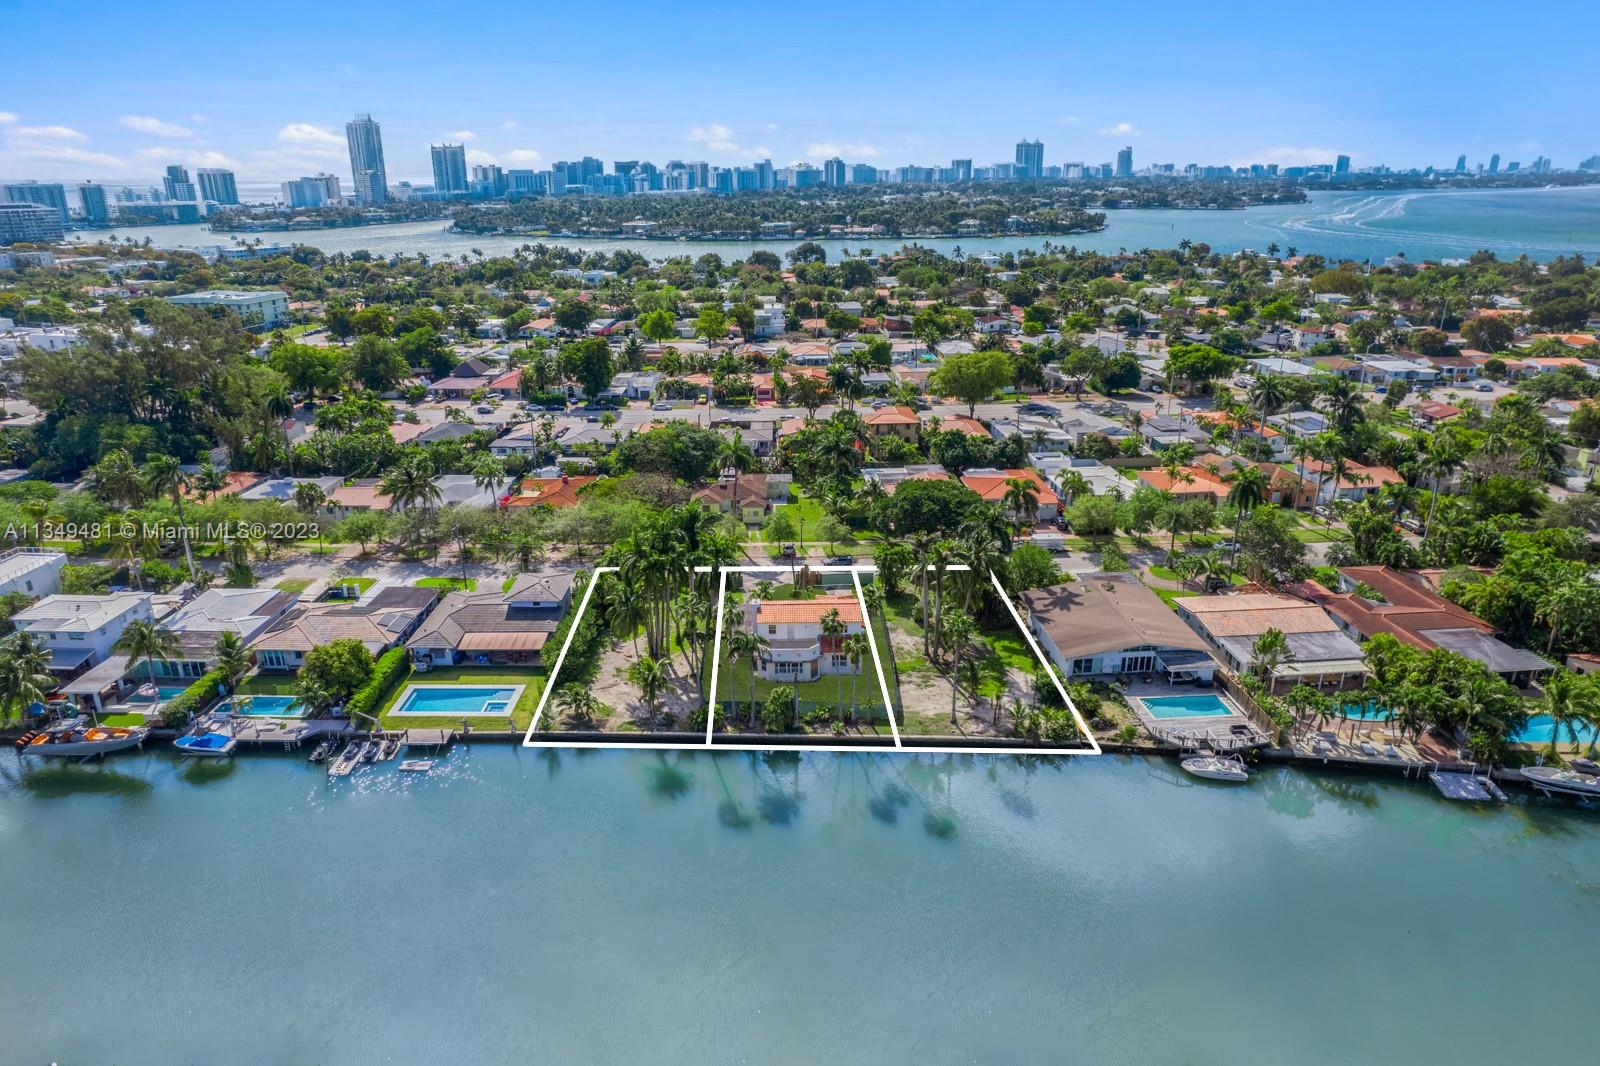 This extraordinary oversized 24,000+ square foot lot located on one of Miami Beach’s premier neighborhoods, Normandy Isles, offers an impressive 188-feet of water-frontage with access to Biscayne Bay. Rare opportunity to develop three adjacent homes or one mega home. The neighborhood offers a park, a nearby golf course, sports facilities, and is conveniently located near the major hot spots throughout Miami. The 3 lots have been legally subdivided. Unapproved plans are available and pending city acceptance.